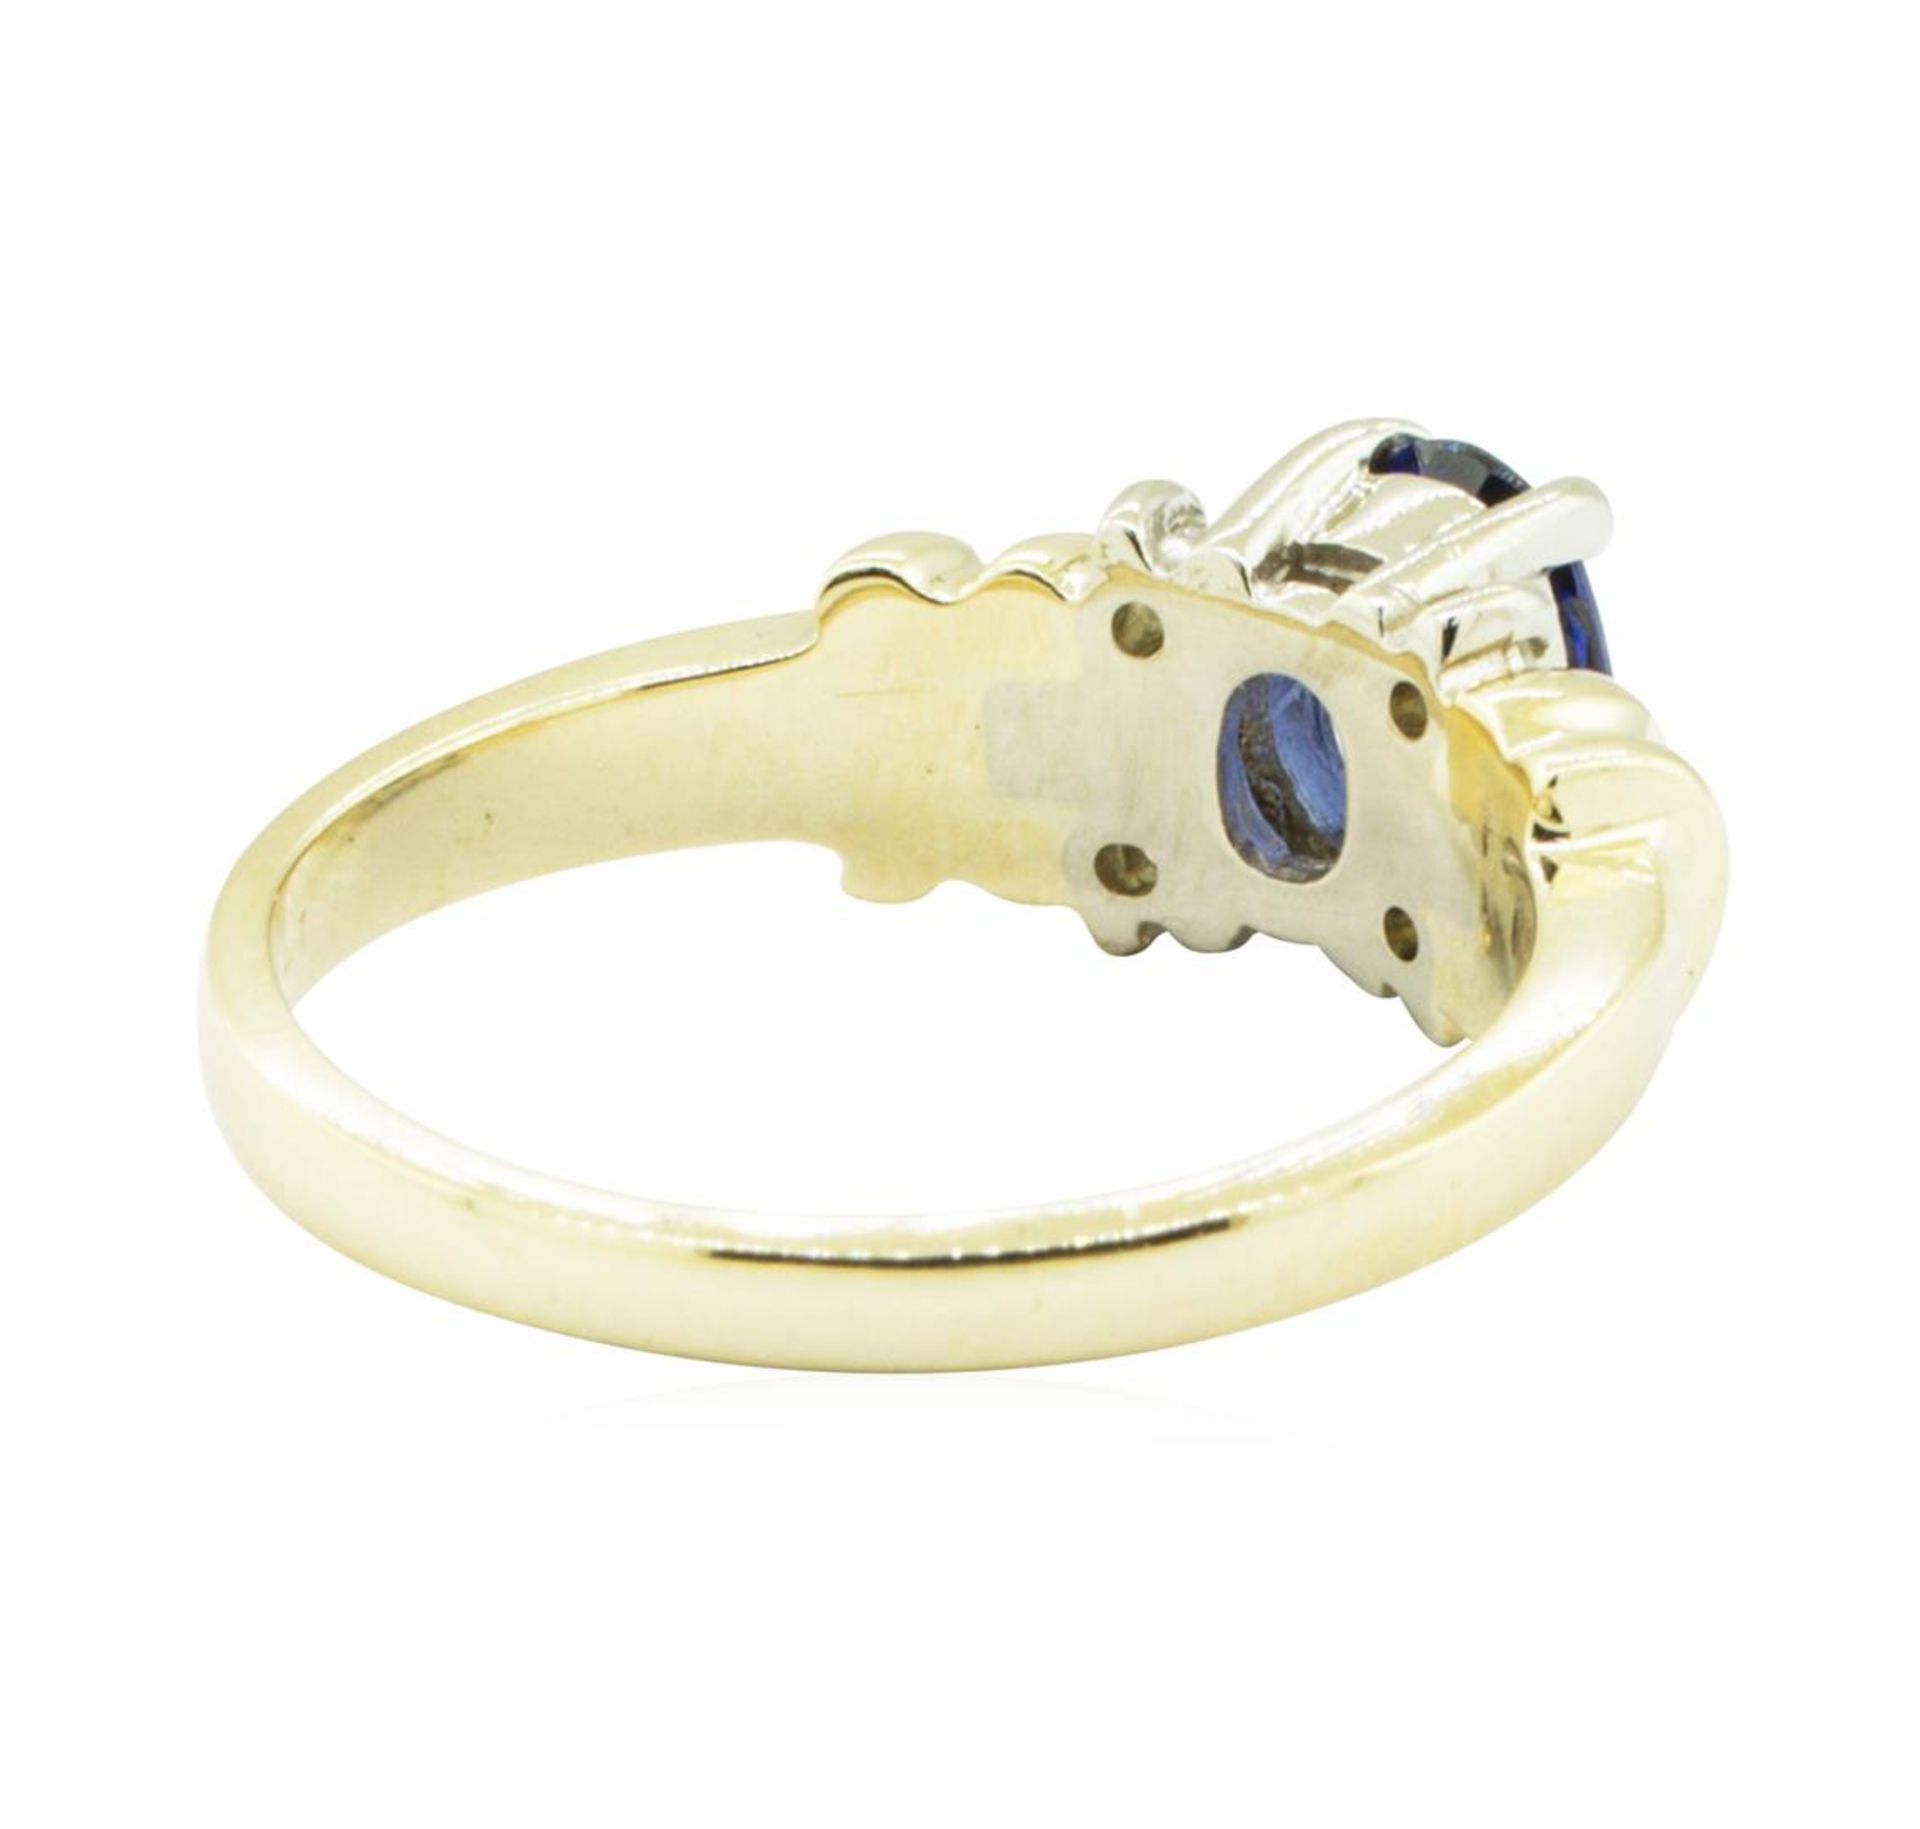 1.00 ctw Blue Sapphire and Diamond Ring - 14KT Yellow and White Gold - Image 3 of 4